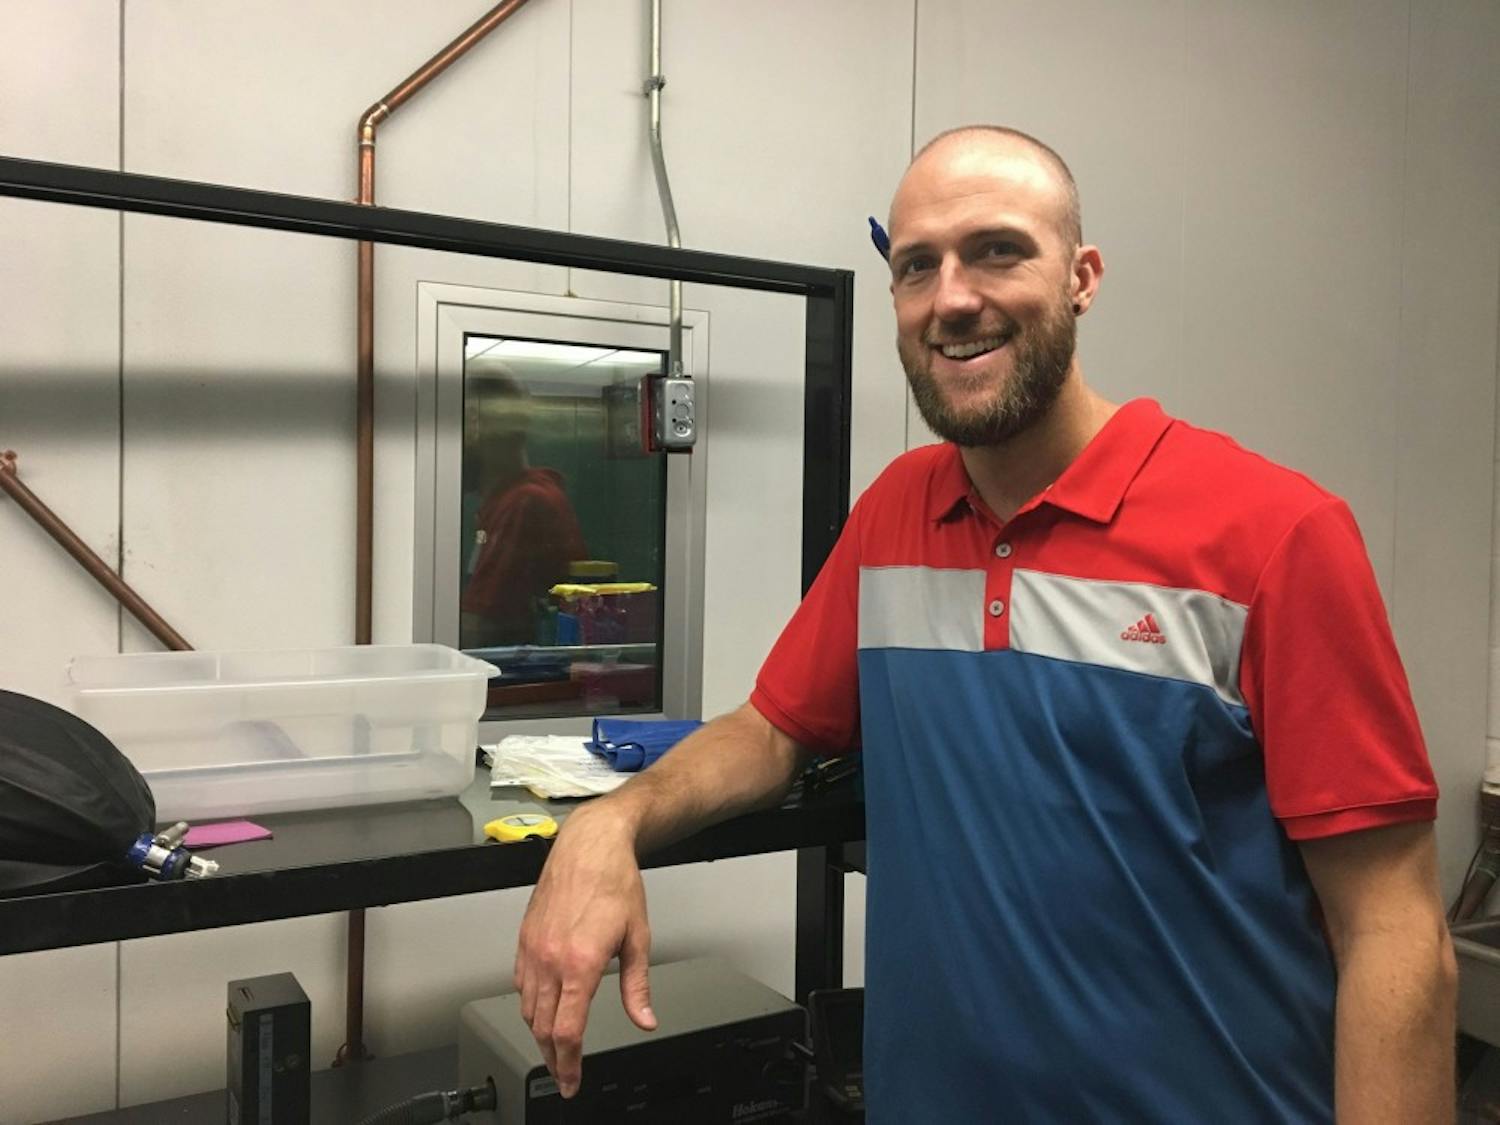 Dr. Zachary Schlader stands in front of a temperature-controlled room that he uses in many of his studies. Schlader, an assistant professor in the department of exercise and nutrition sciences, conducts research on exercise physiology, behavior and thermoregulation.